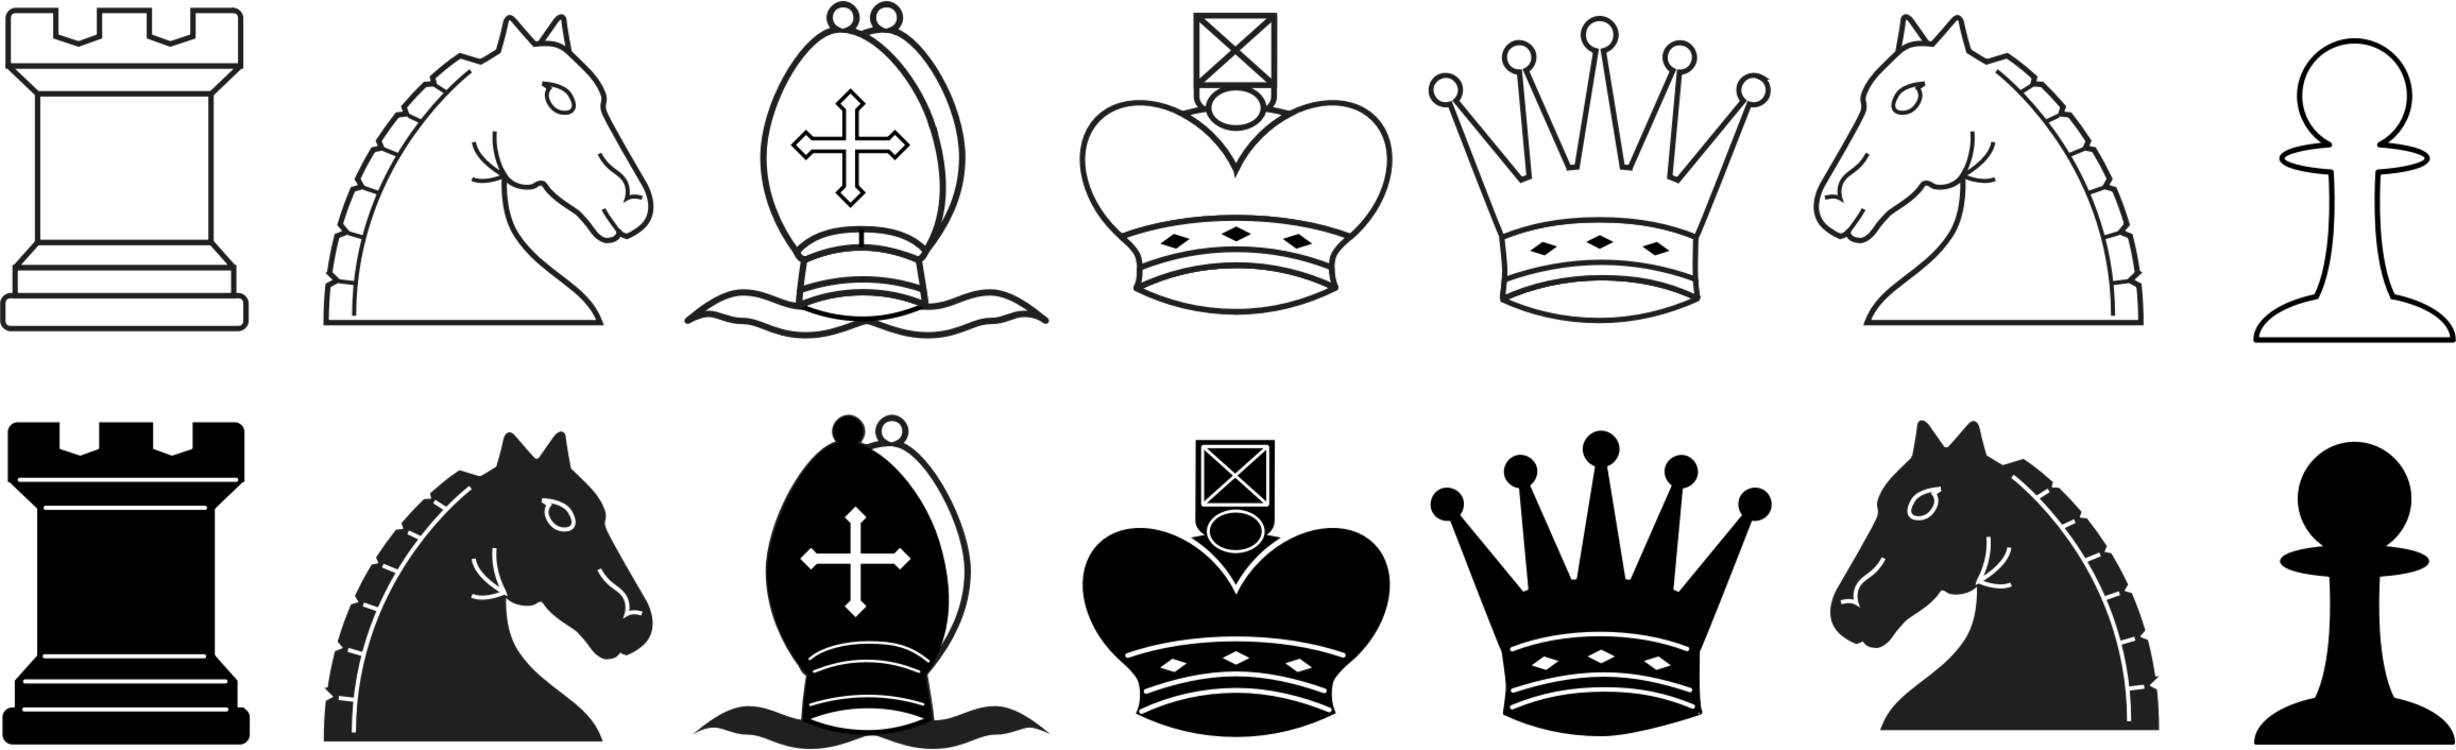 Chess SVG Chess Pieces Clipart Black & White Chess (Download Now) 